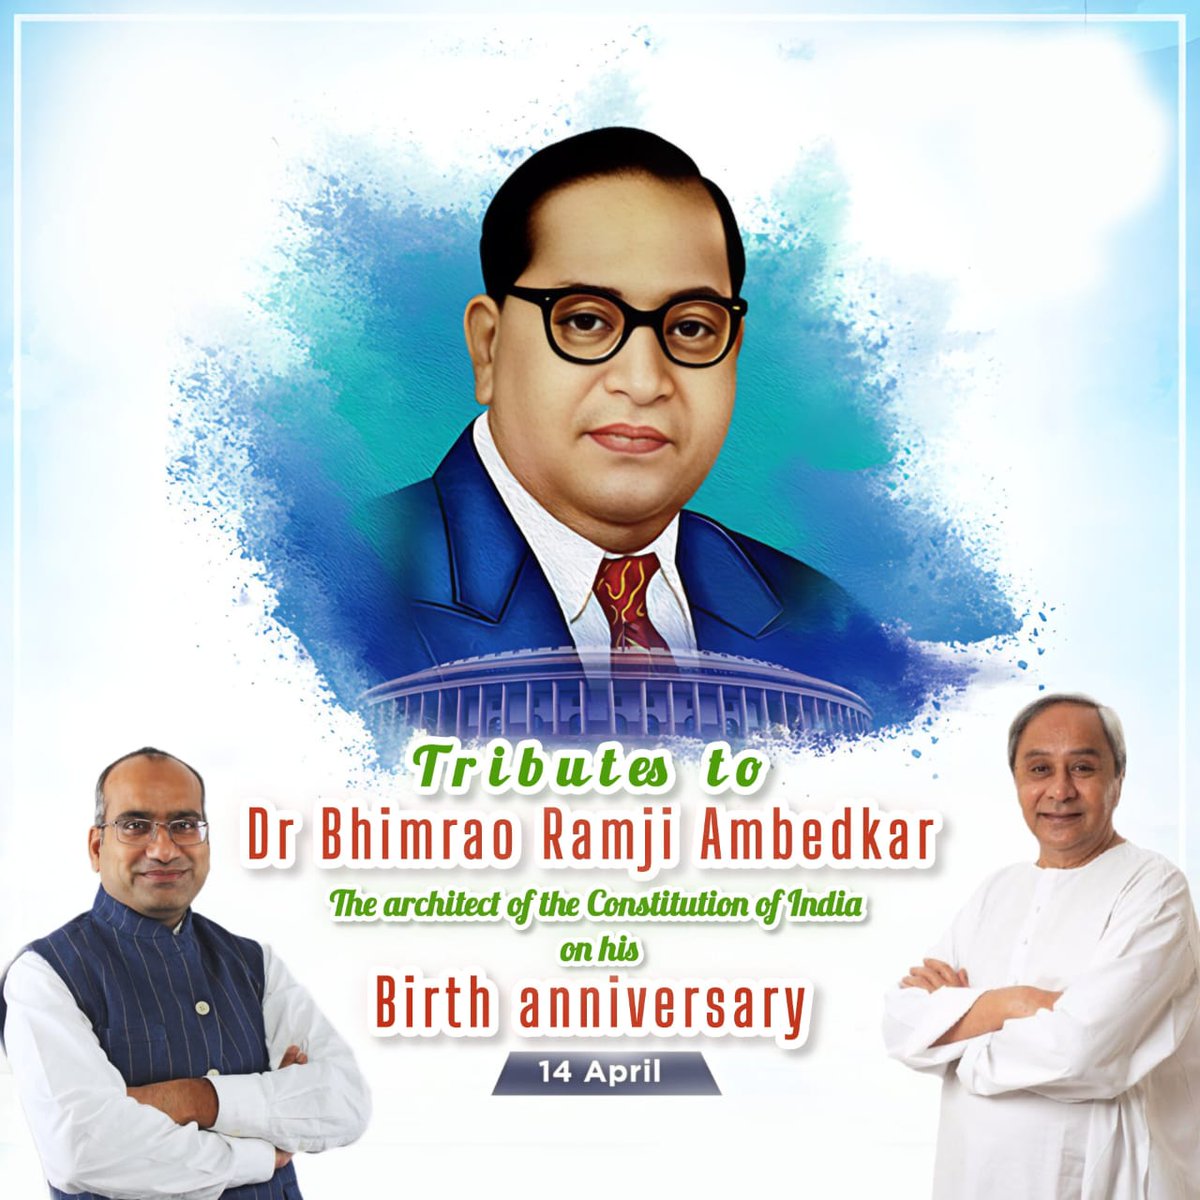 Paying my humble tributes to the architect of #IndianConstitution, Bharat Ratna Dr #BRAmbedkar on his birth anniversary. His tireless efforts for the upliftment of the underprivileged continue to inspire generations. On #AmbedkarJayanti, let's honor his profound contributions…